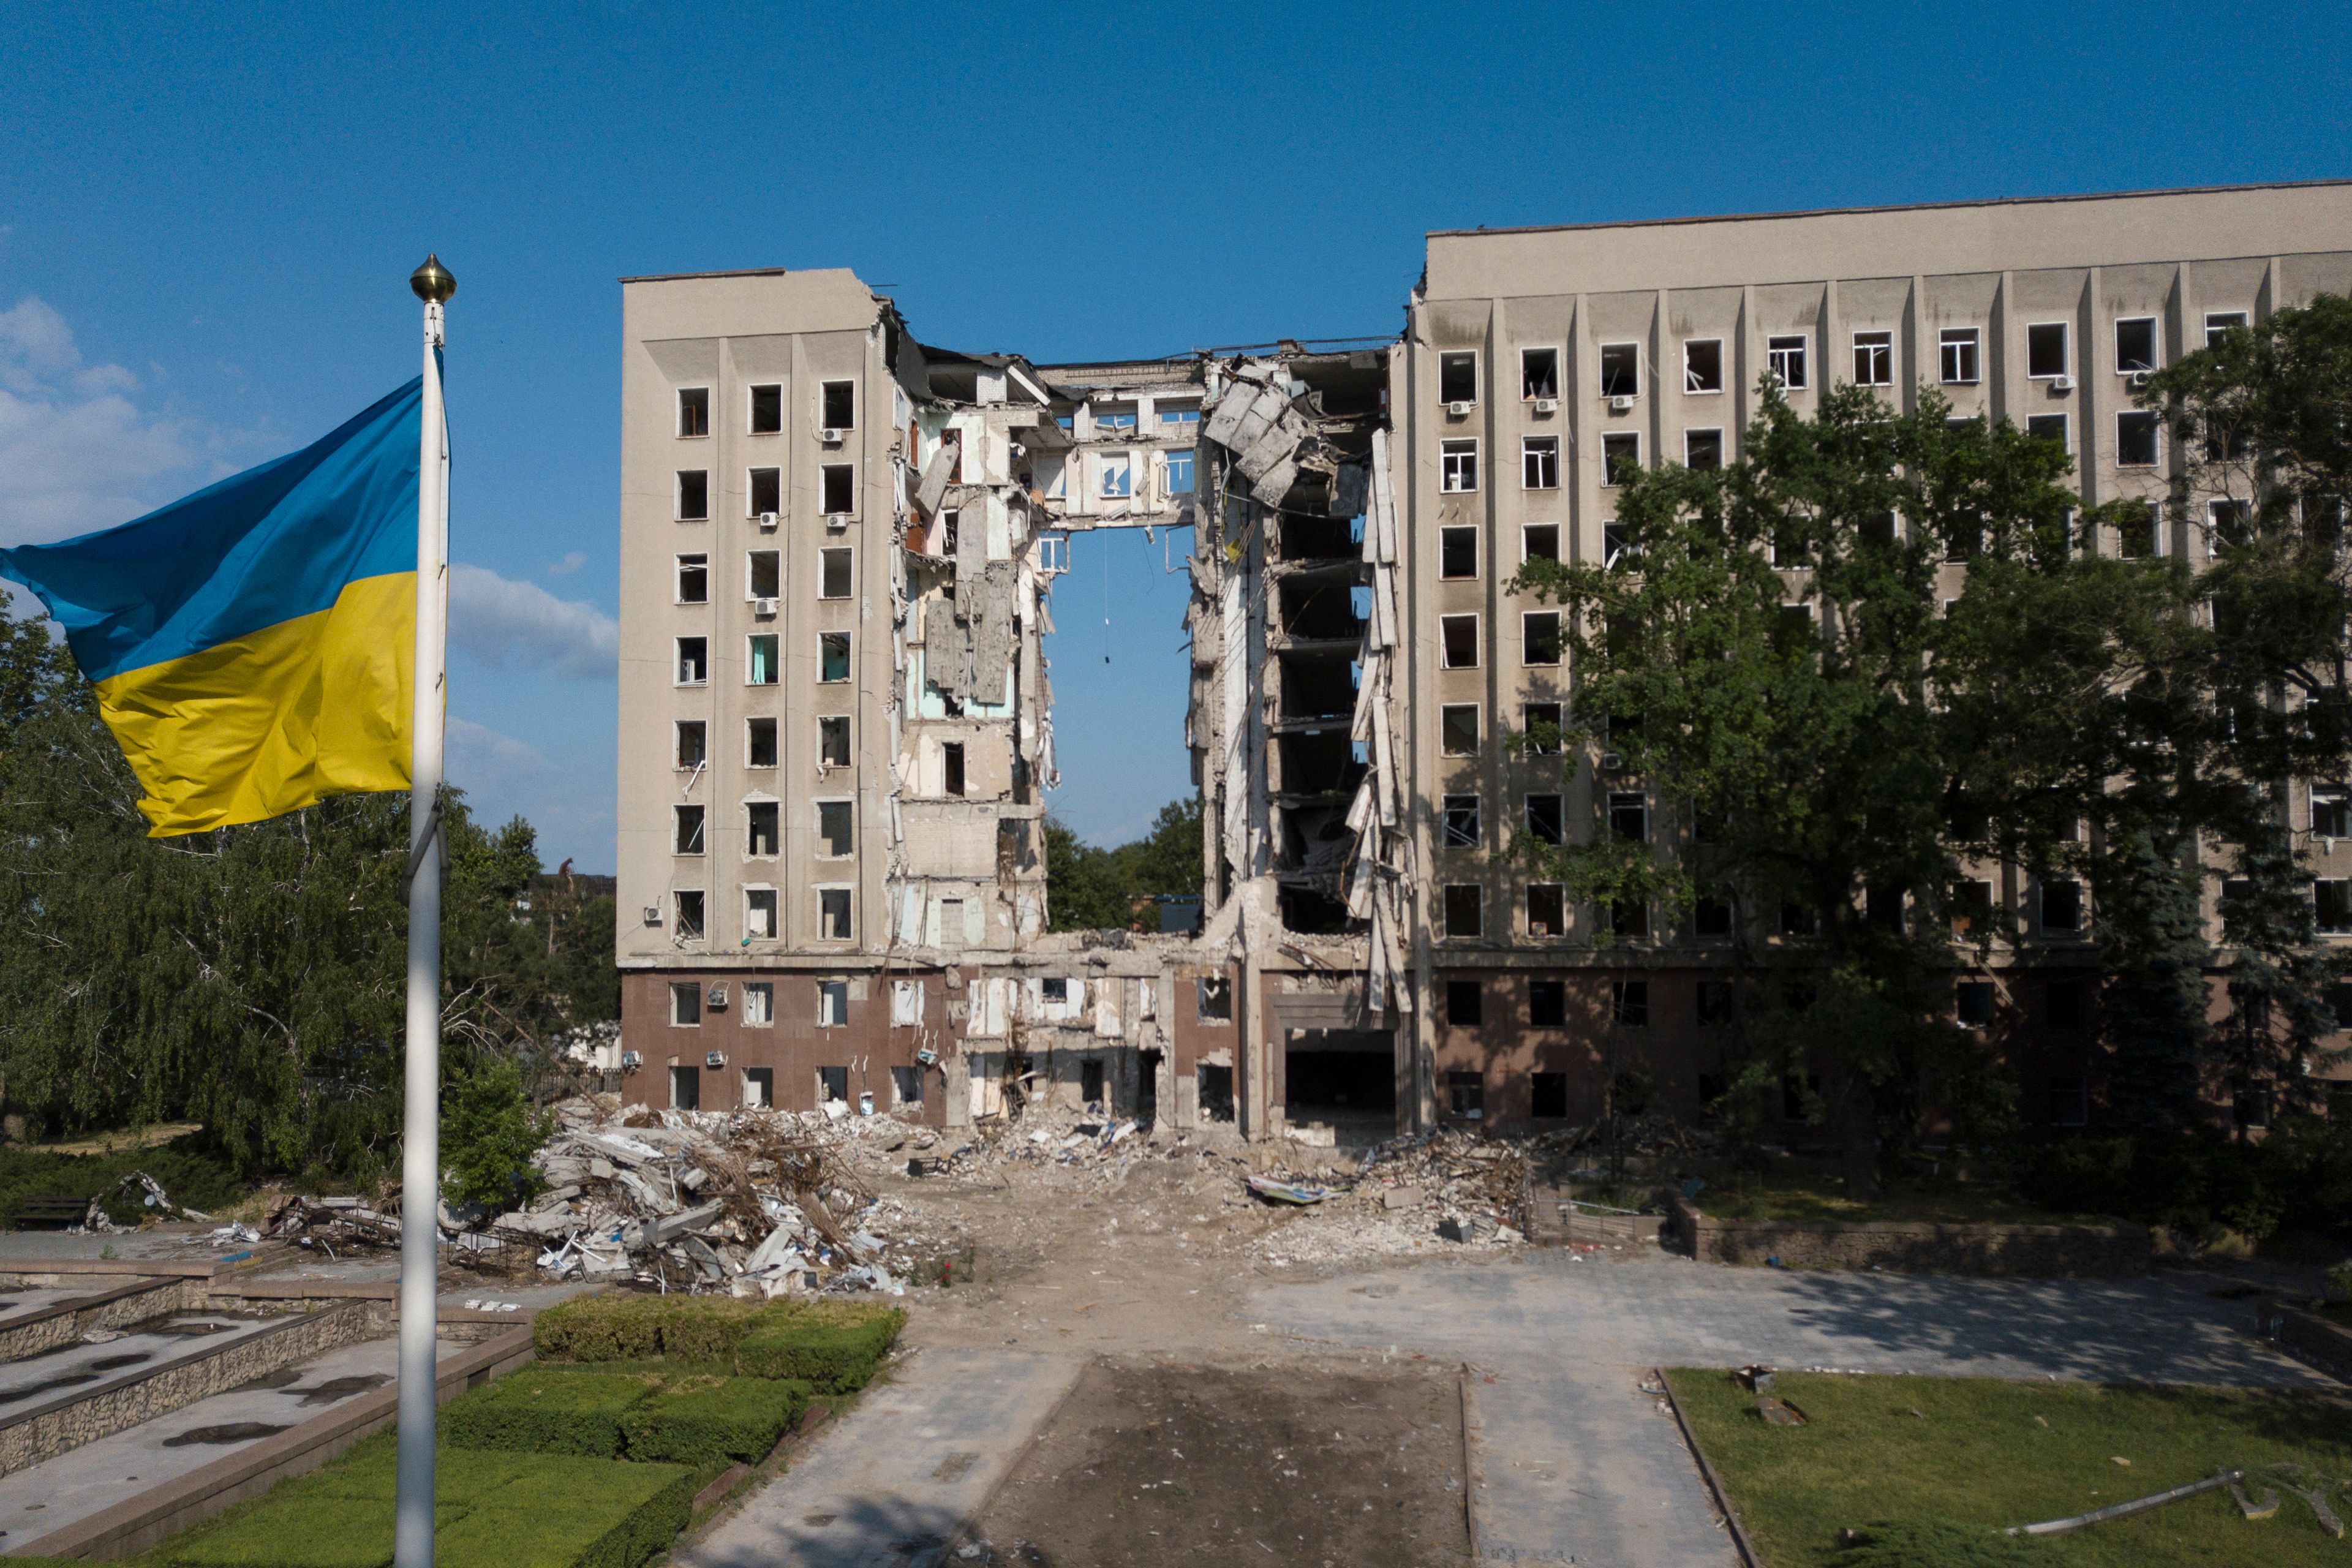 The regional government building destroyed by a Russian missile strike in March 2022, in the southern Ukrainian city of Mykolaiv.